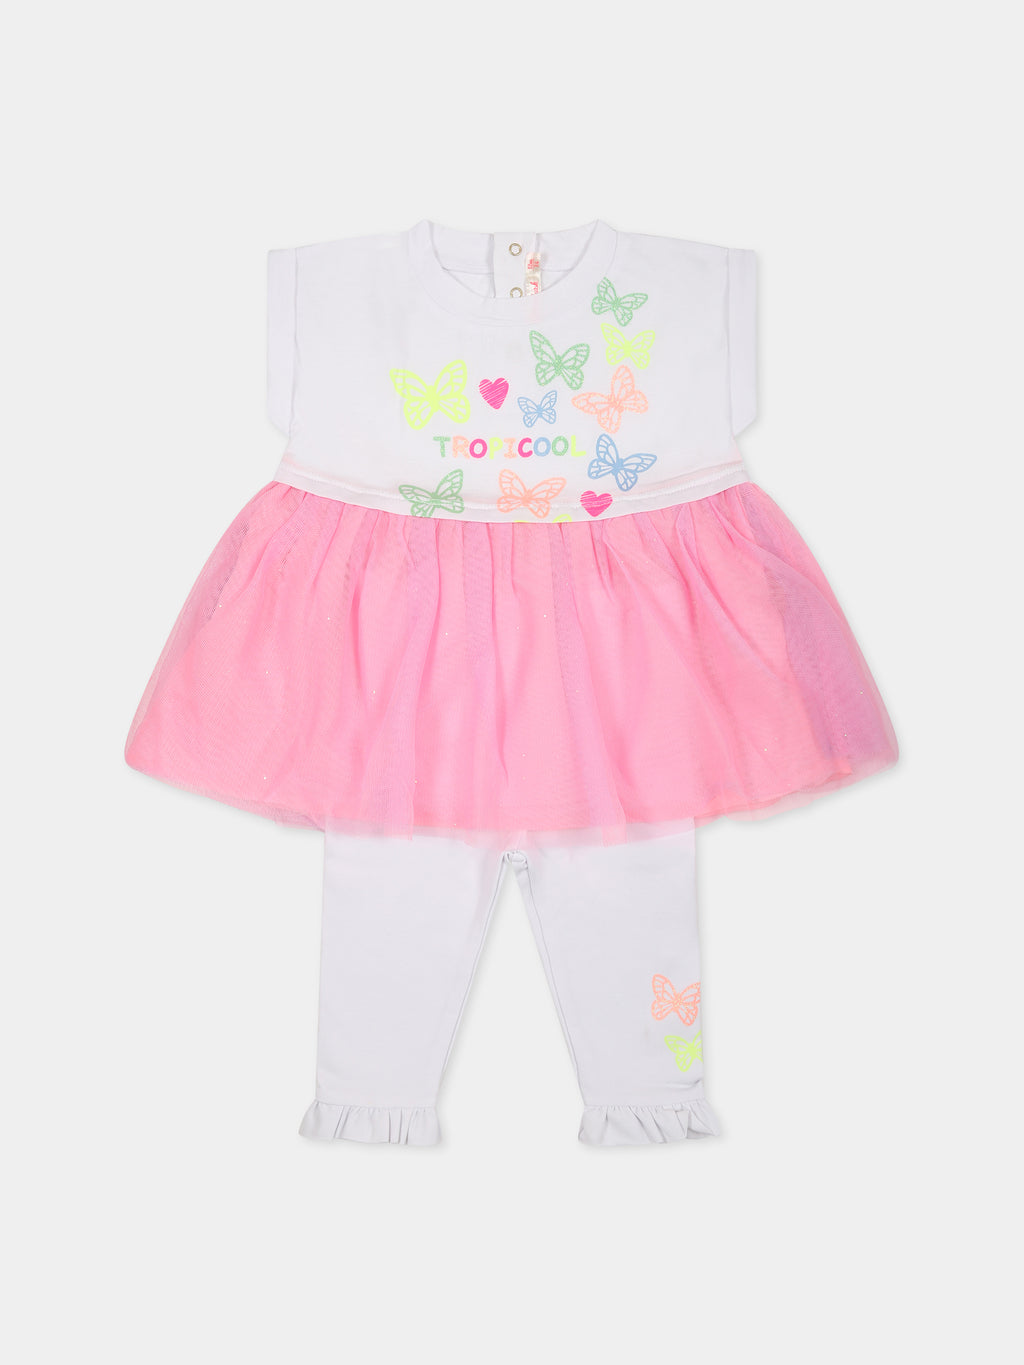 White suit for baby girl with butterflies and hearts